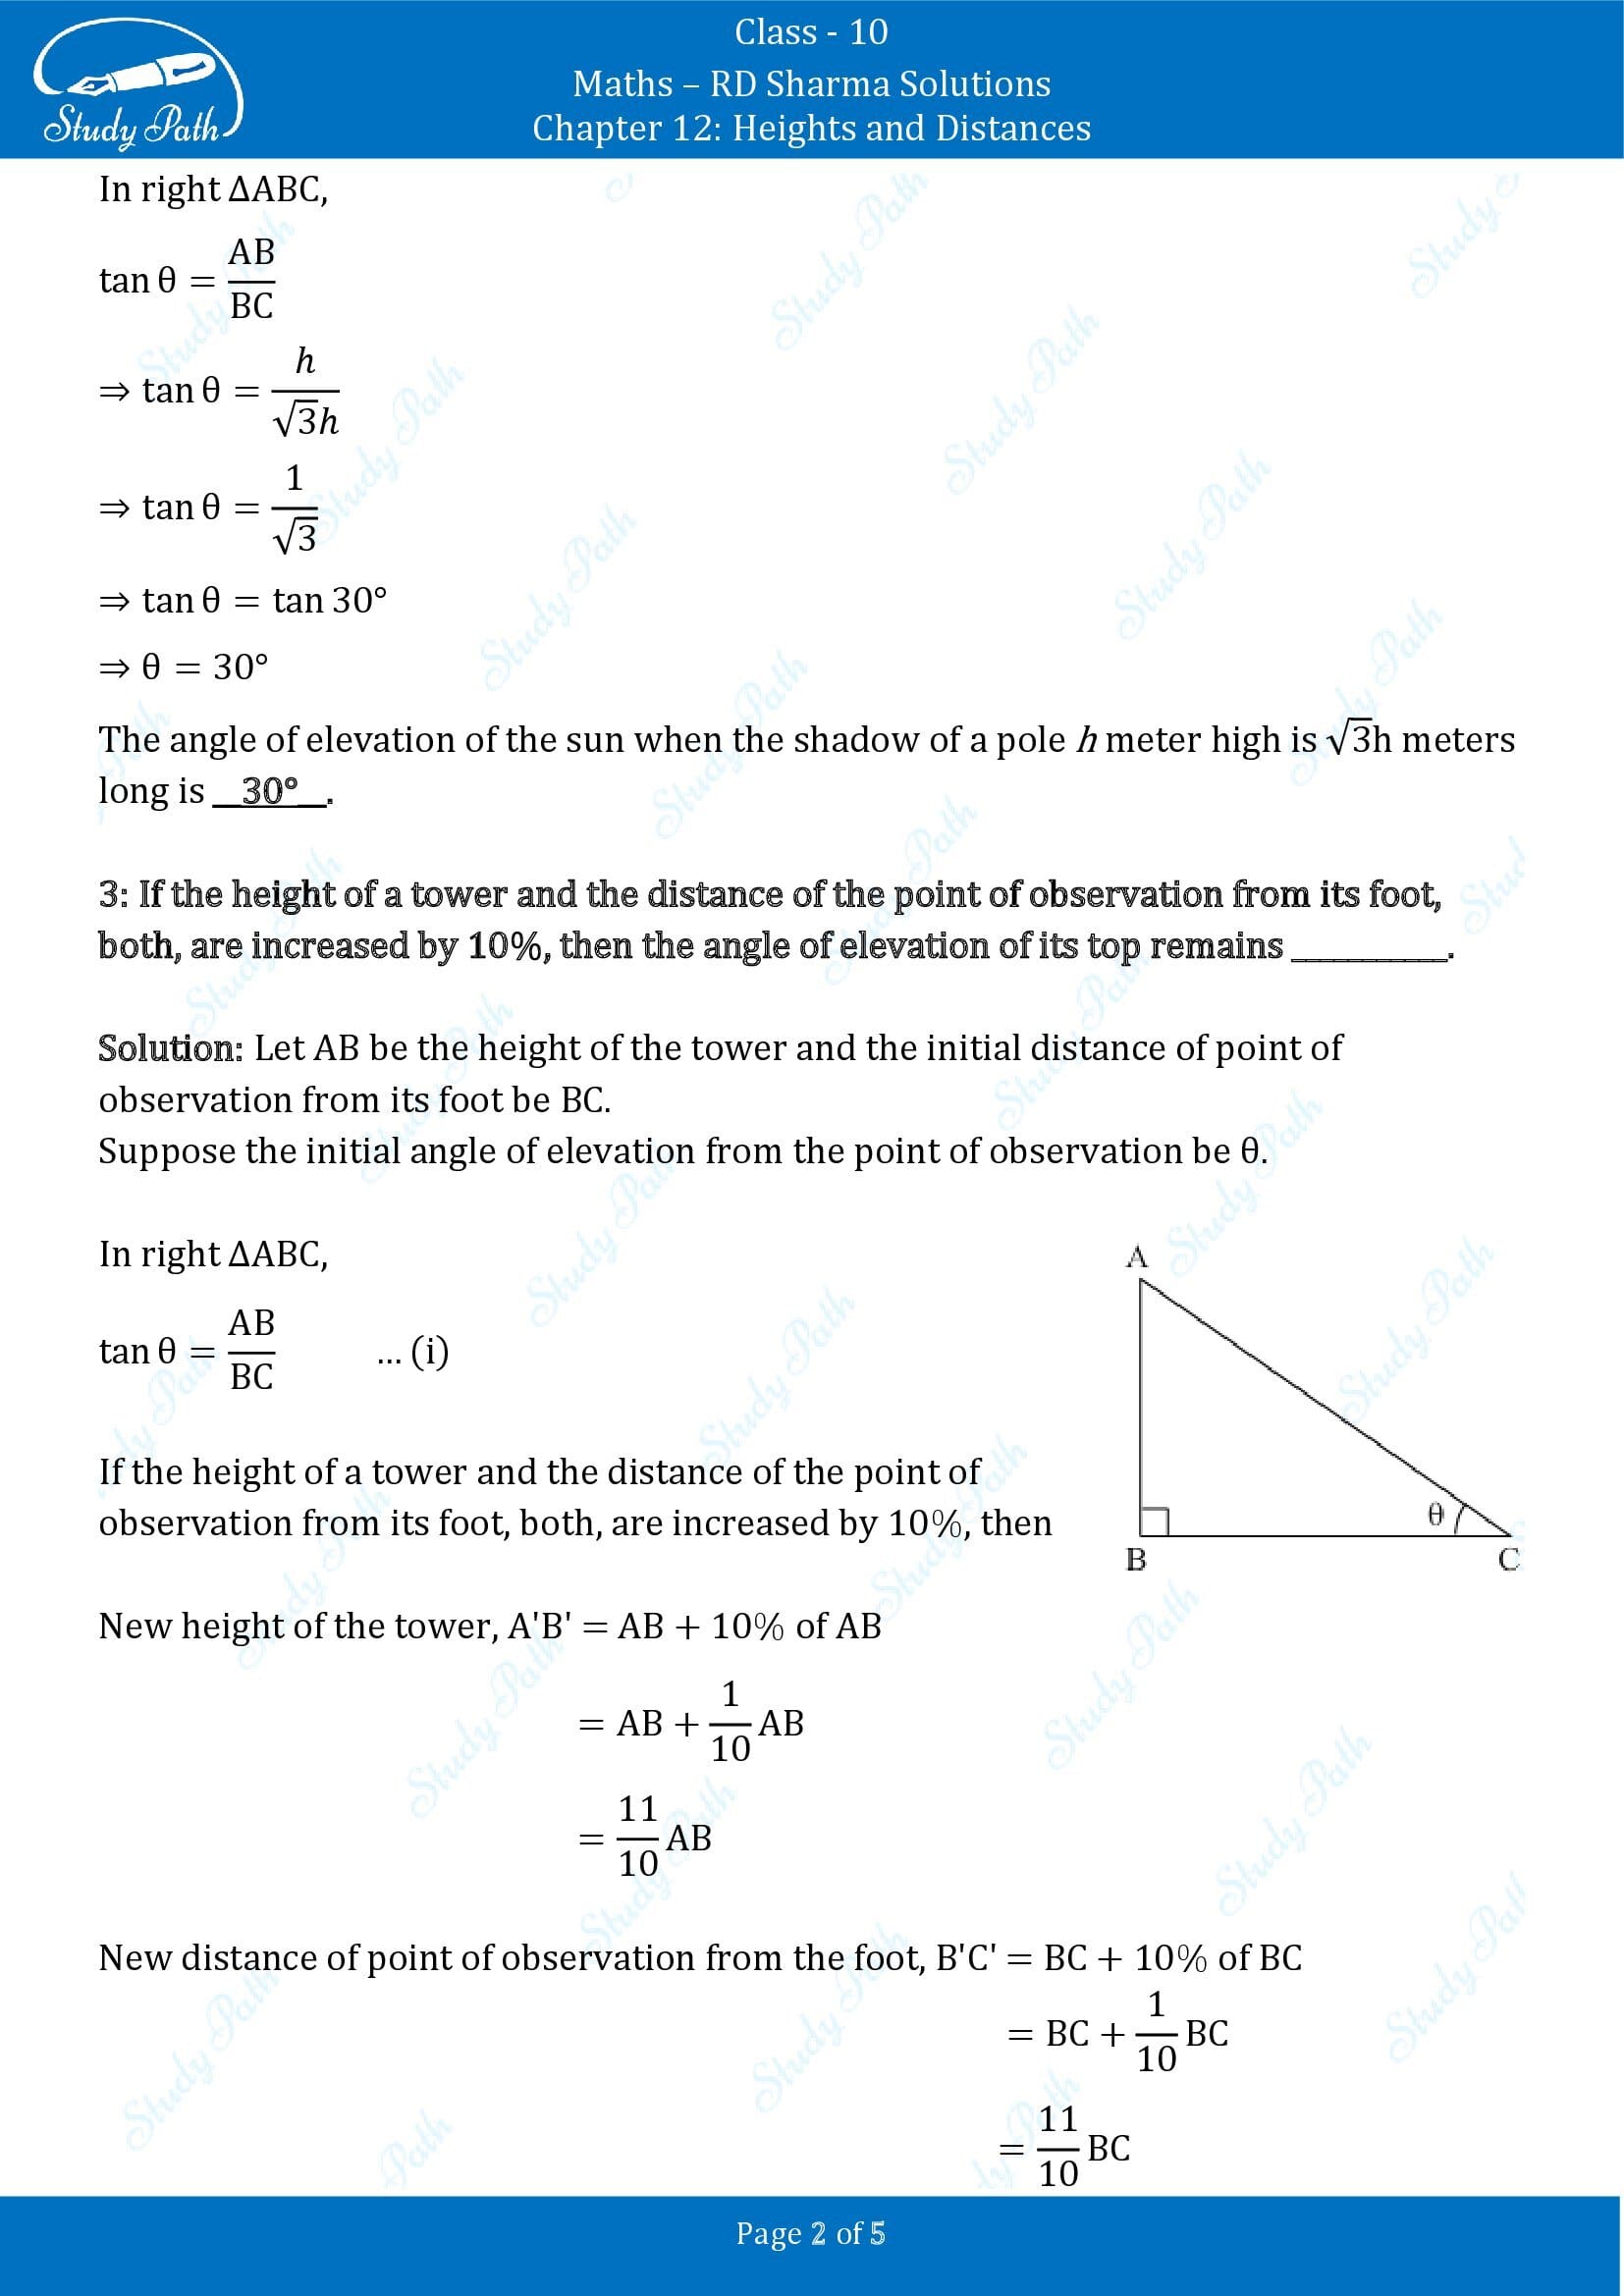 RD Sharma Solutions Class 10 Chapter 12 Heights and Distances Fill in the Blank Type Questions FBQs 00002